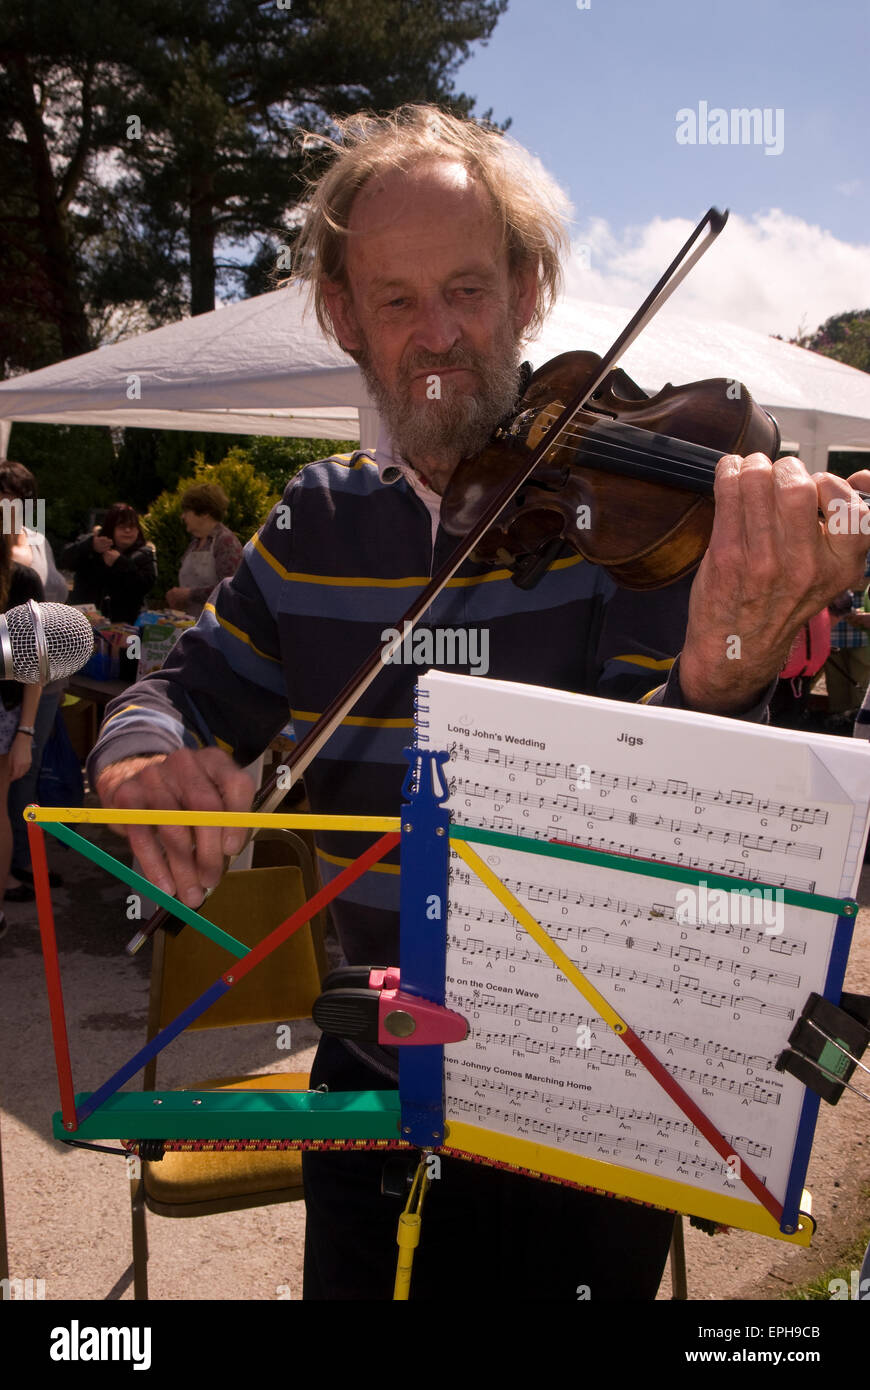 Man entertaining the crowds playing the violin at a May Fayre, Oakhanger, Hampshire, UK. Stock Photo